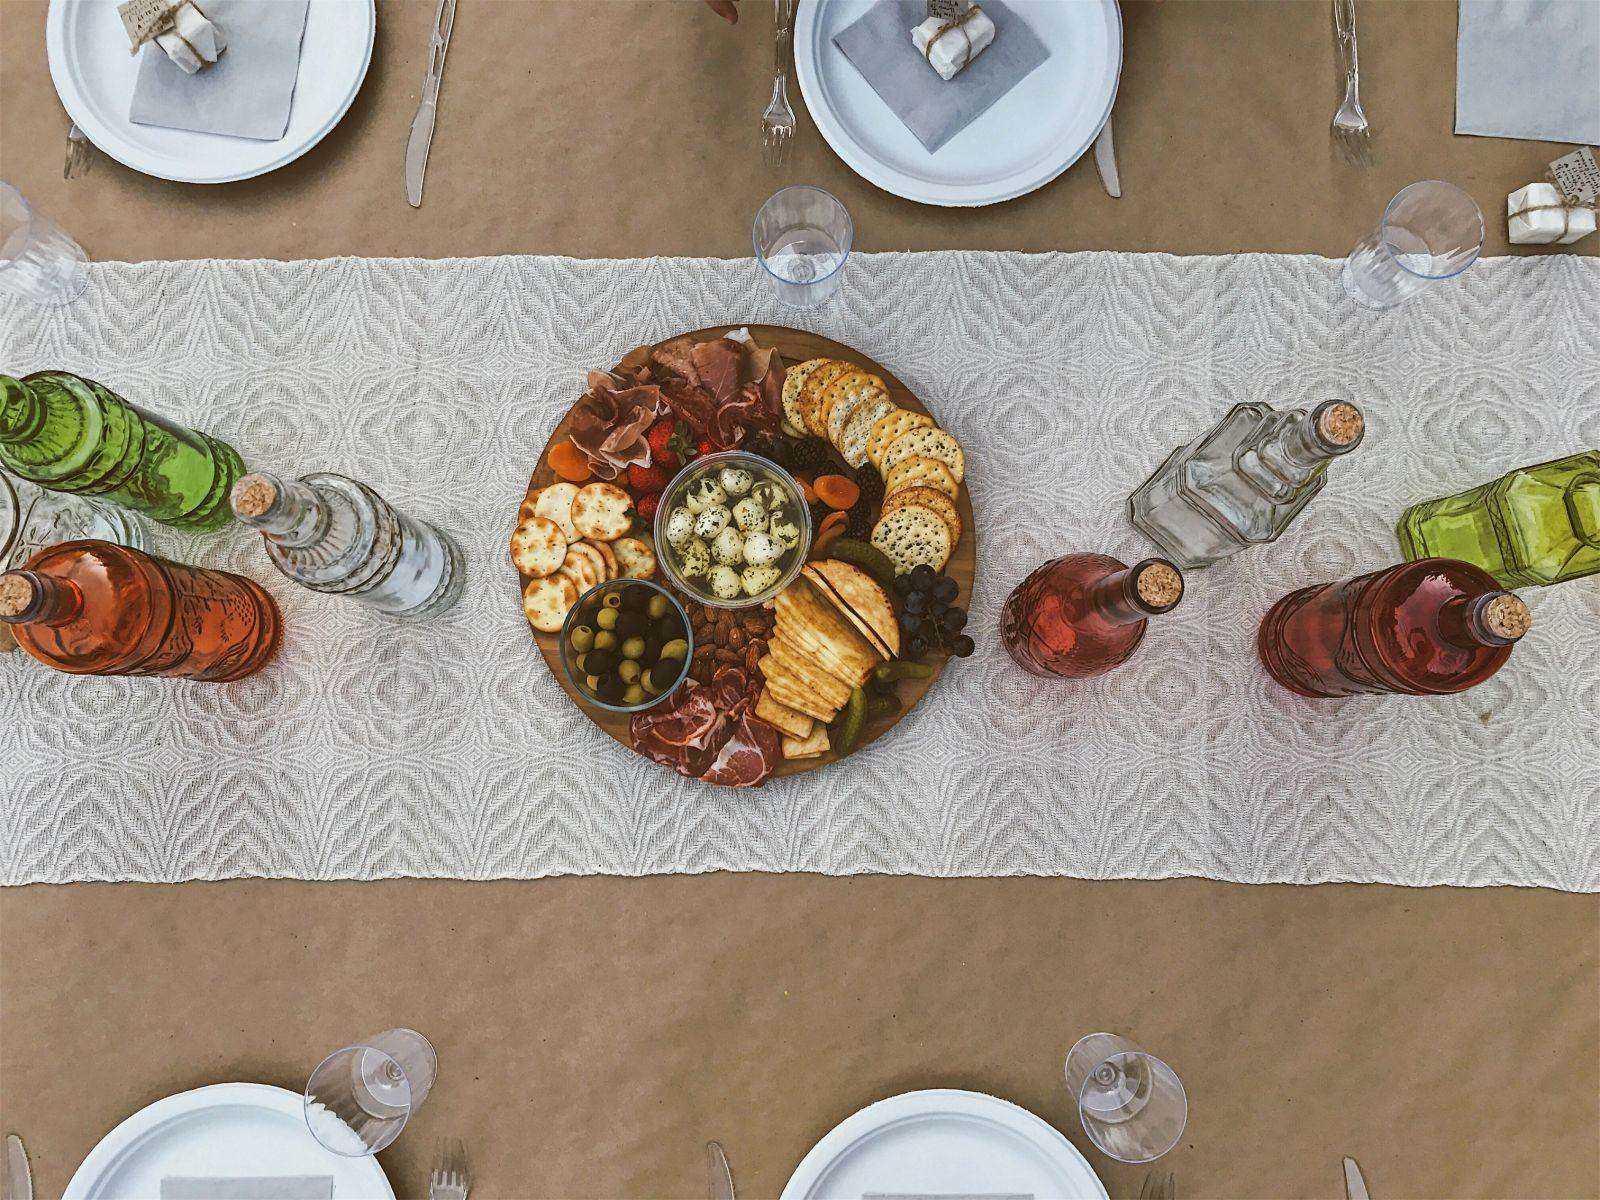 Photo of a white table runner on a table with a tray and bottles on it.